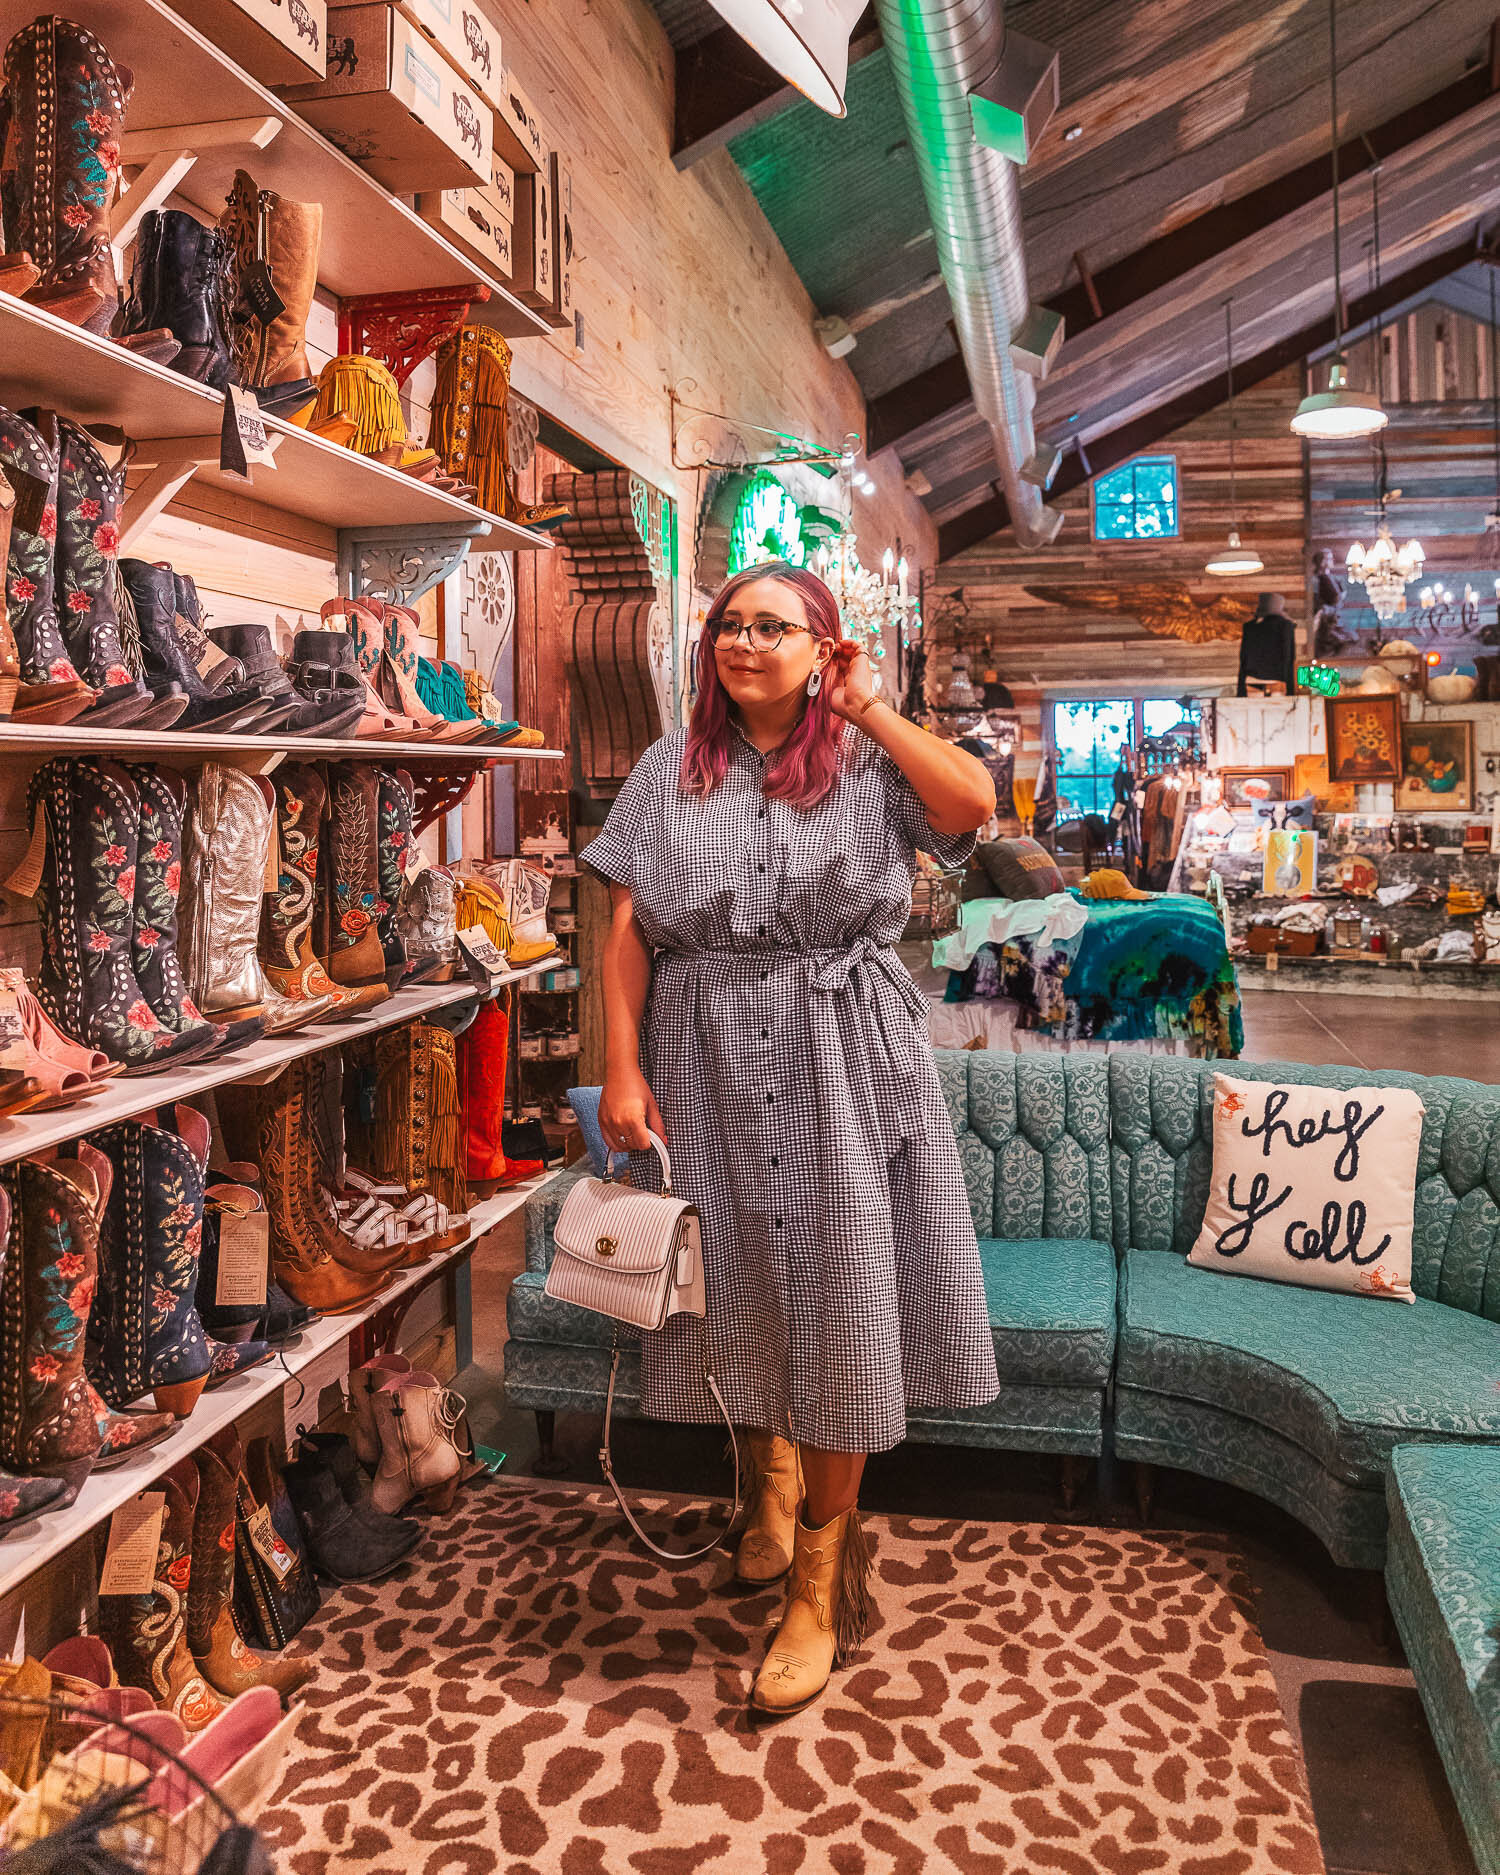 Junk Gypsy boot shopping in Round Top // The Best Day Trips from Austin, Texas #atx #travel #texas #roadtrip